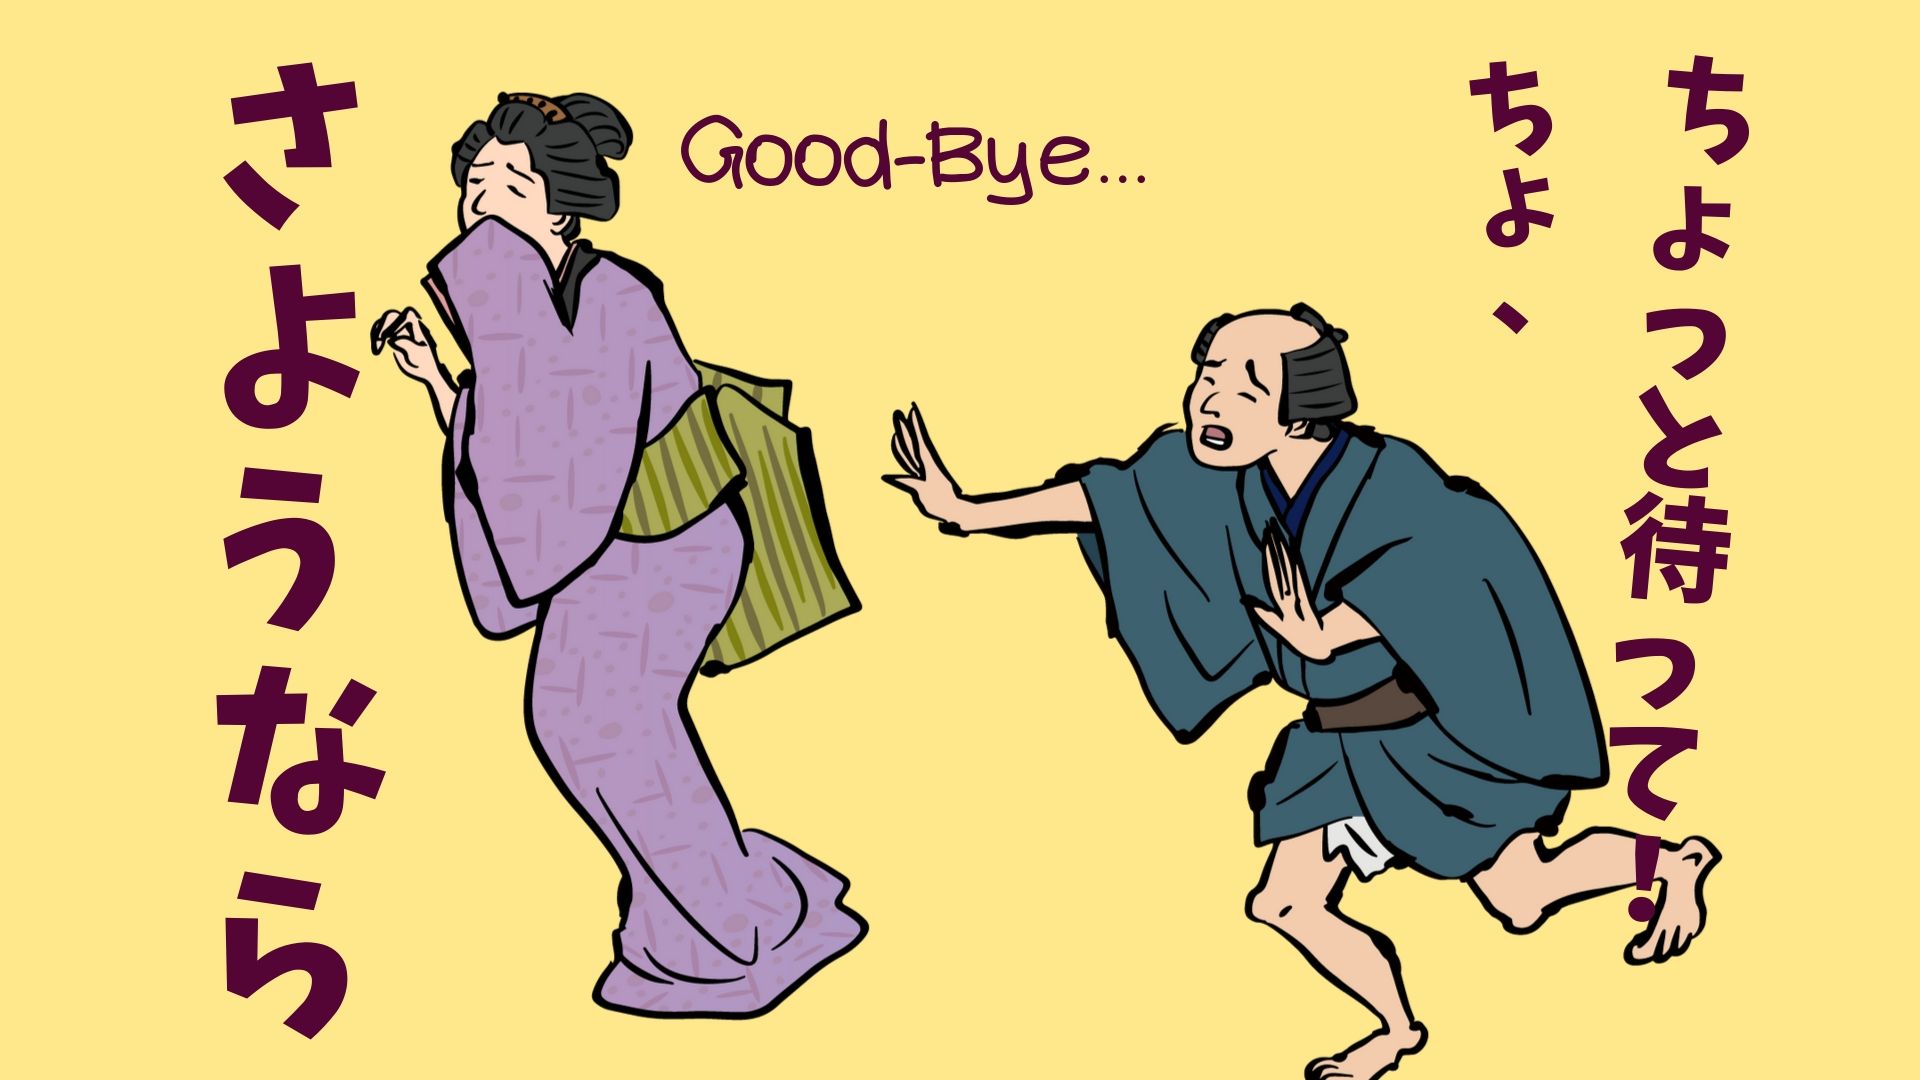 How to say ‘See you again’ or ‘Goodbye’ in Japanese? and What does ‘Sayonara’ mean?